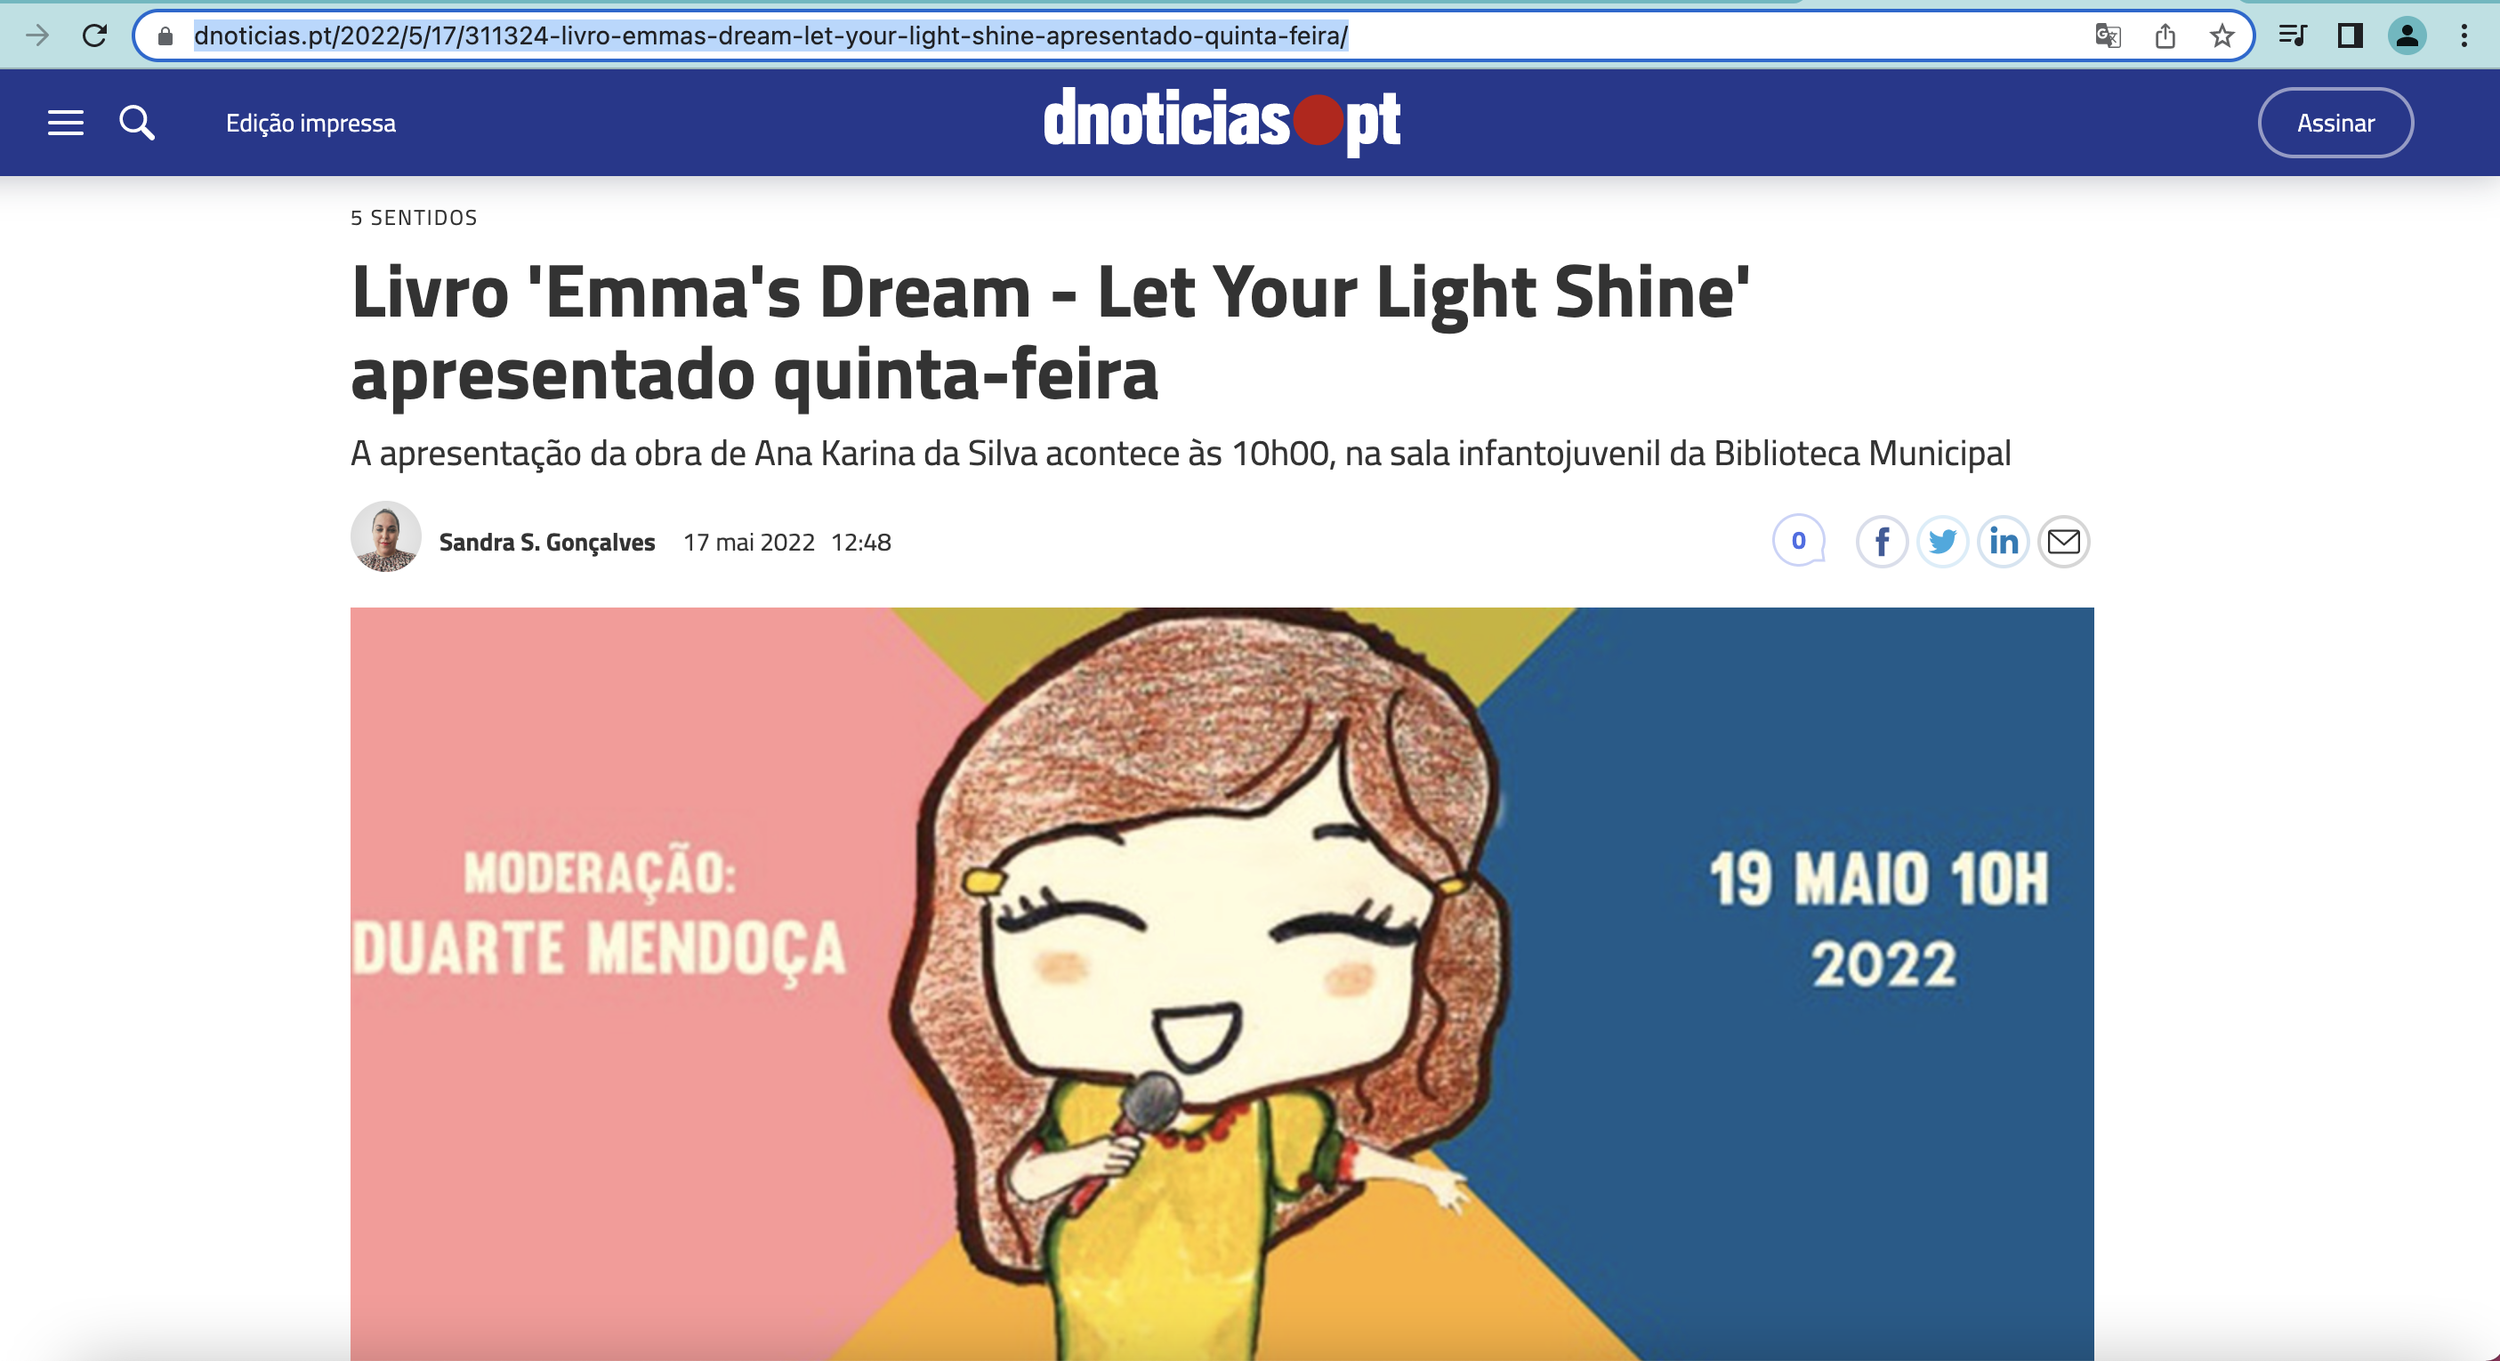 The Book Emma's Dream will be presented on Wednesday at the Municipal Library in the Capital of Madeira, Portugal (Copy)